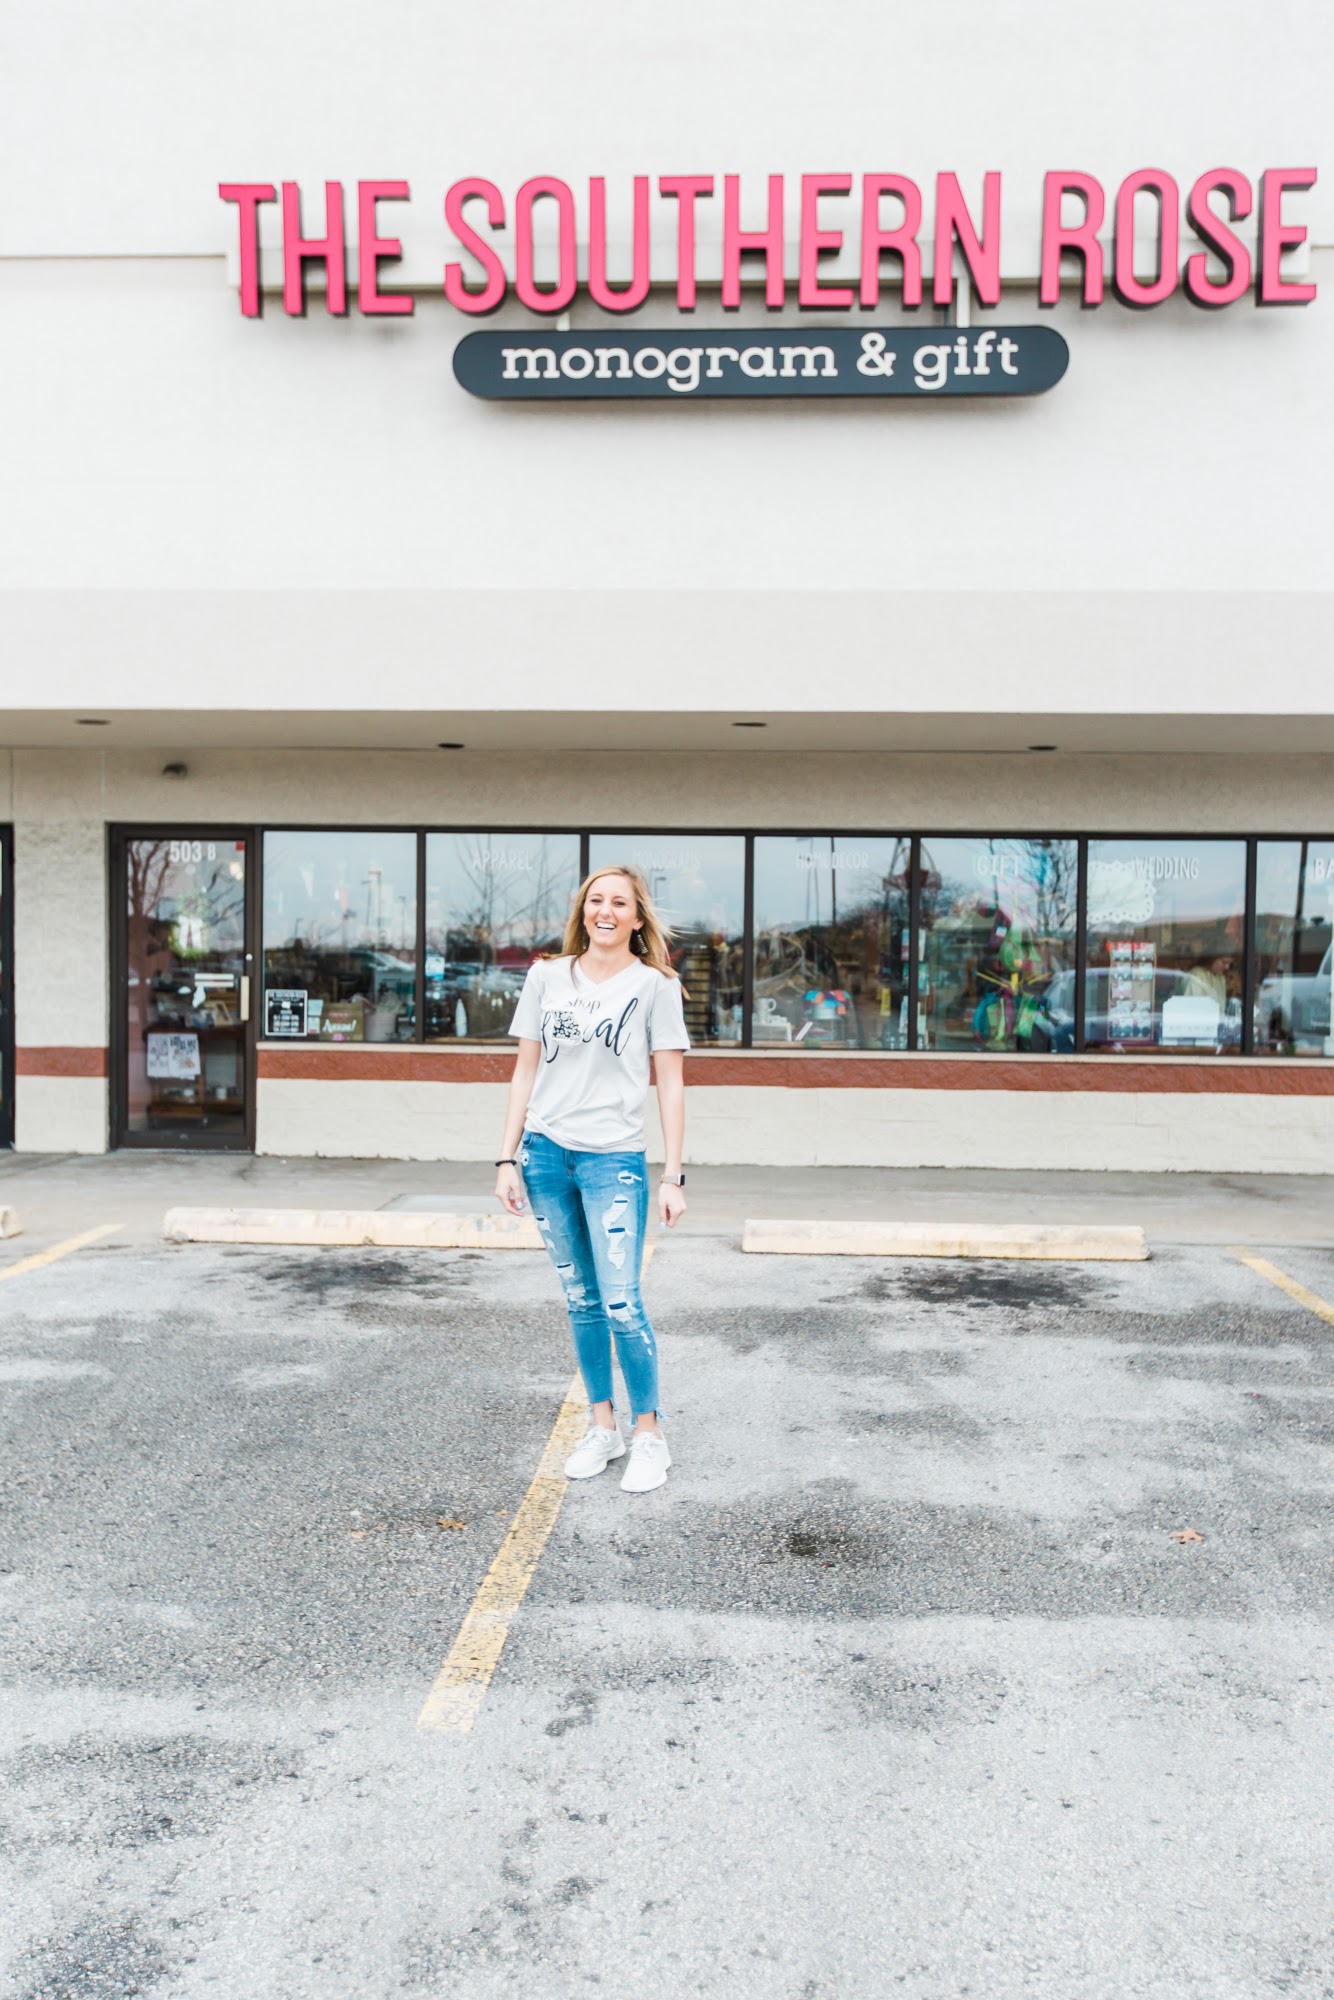 The Southern Rose - Monogram & Gift Boutique